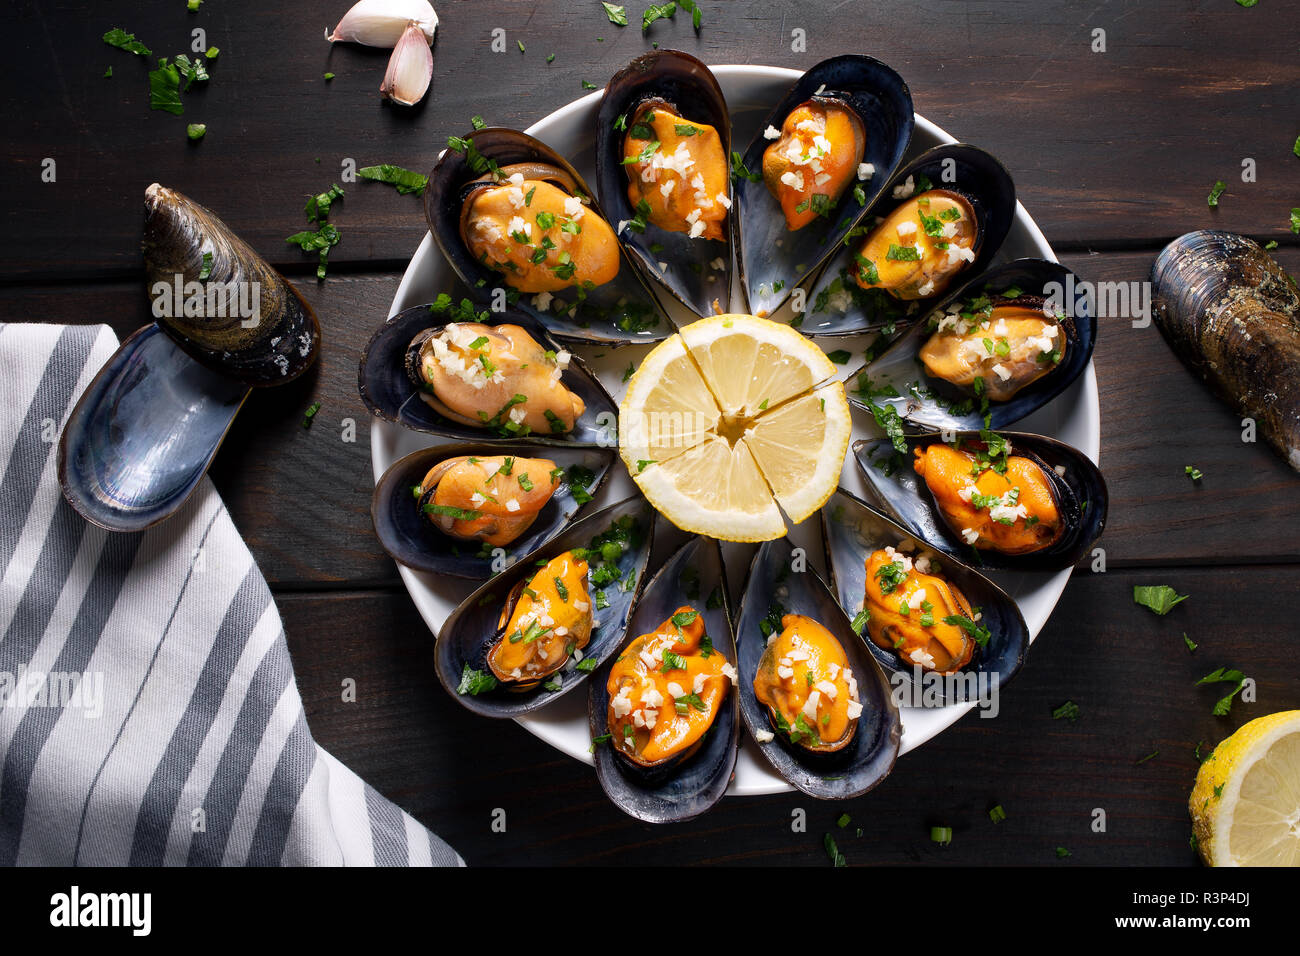 Cooked Mussels. Steamed mussels in white wine sauce with parsley and garlic. Tasty spanish seafood recipe. Top view Stock Photo